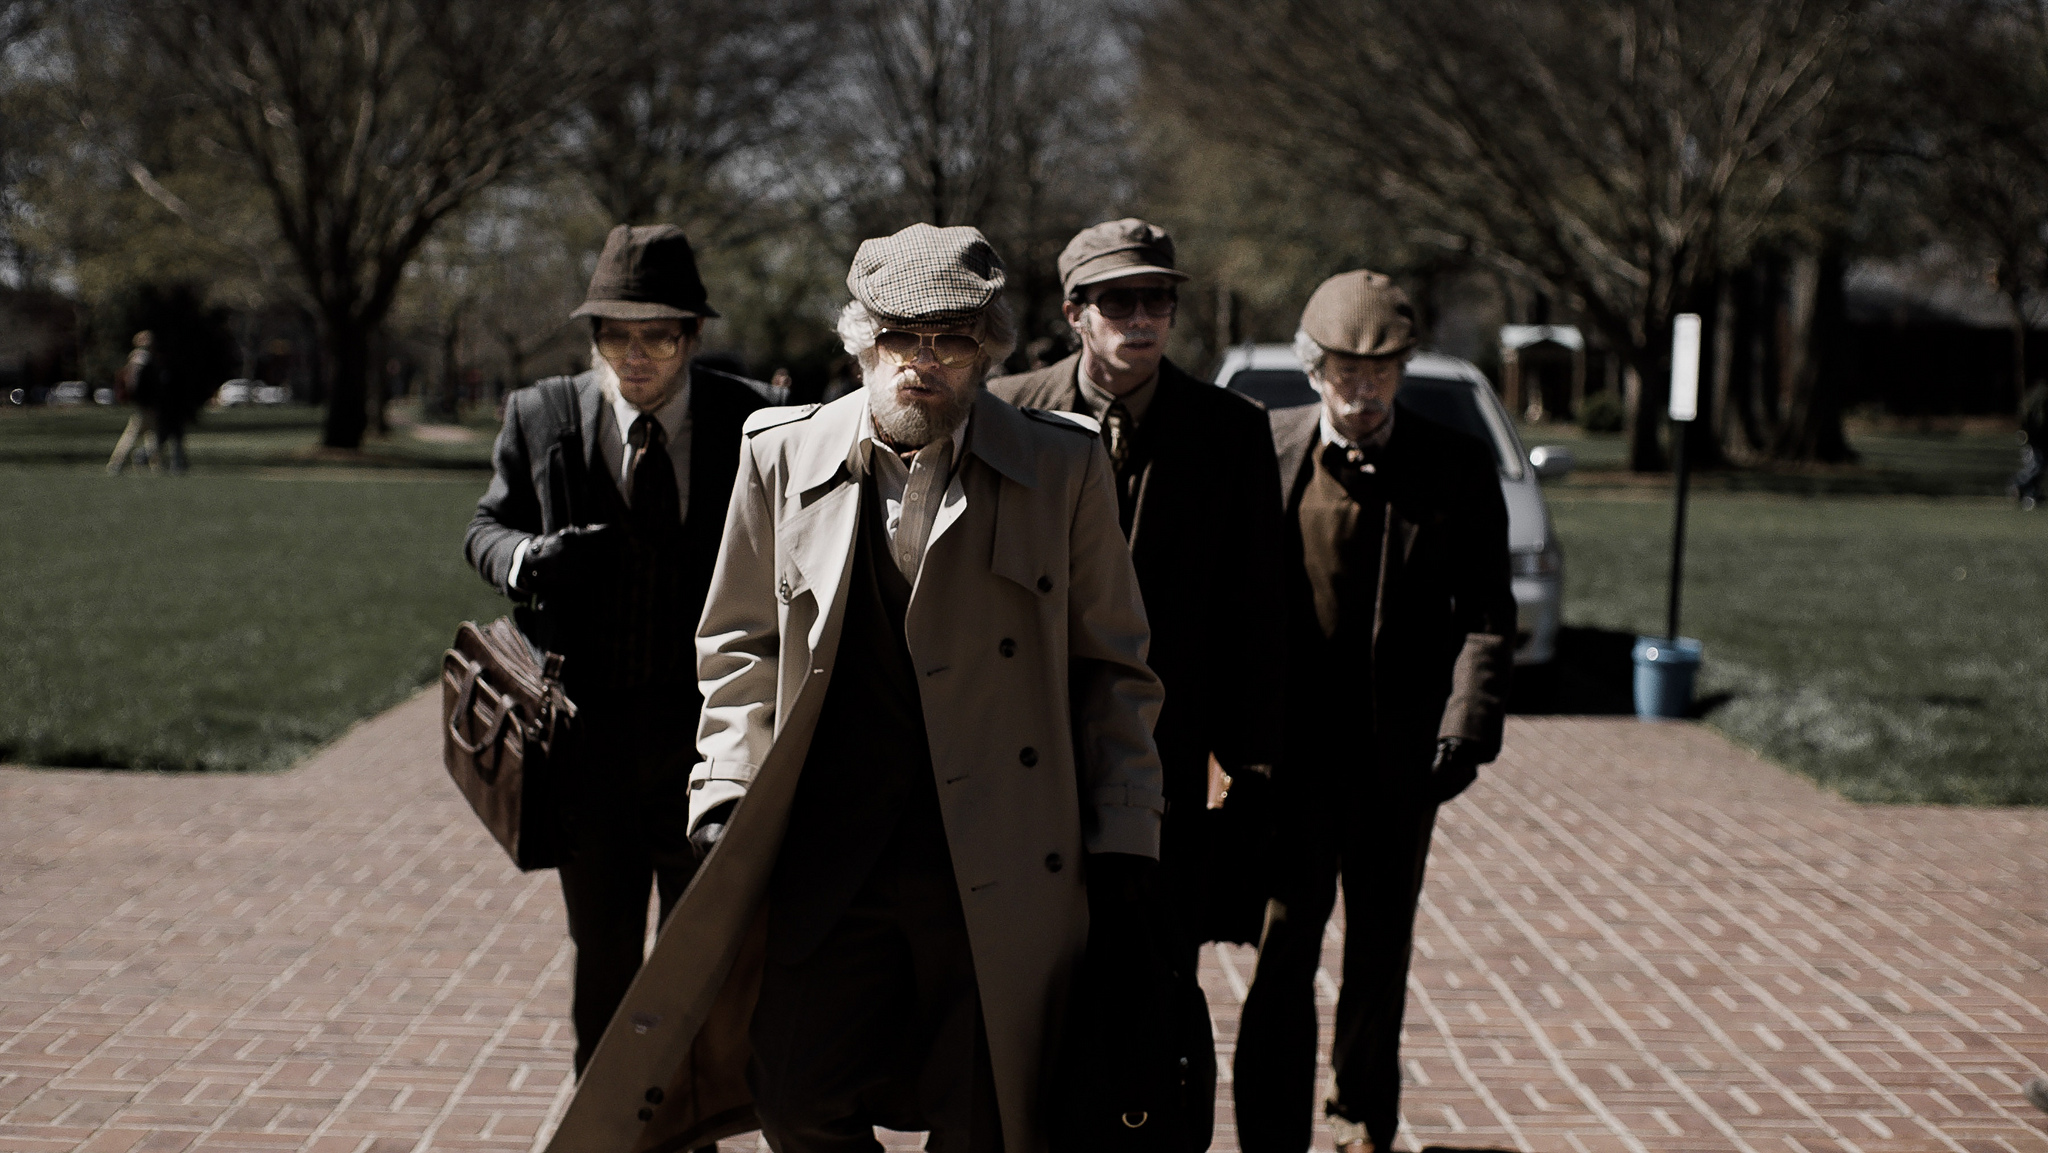 Jared Abrahamson, Evan Peters, Blake Jenner and Barry Keoghan appear in American Animals by Bart Layton, an official selection of the U.S. Dramatic Competition at the 2018 Sundance Film Festival.